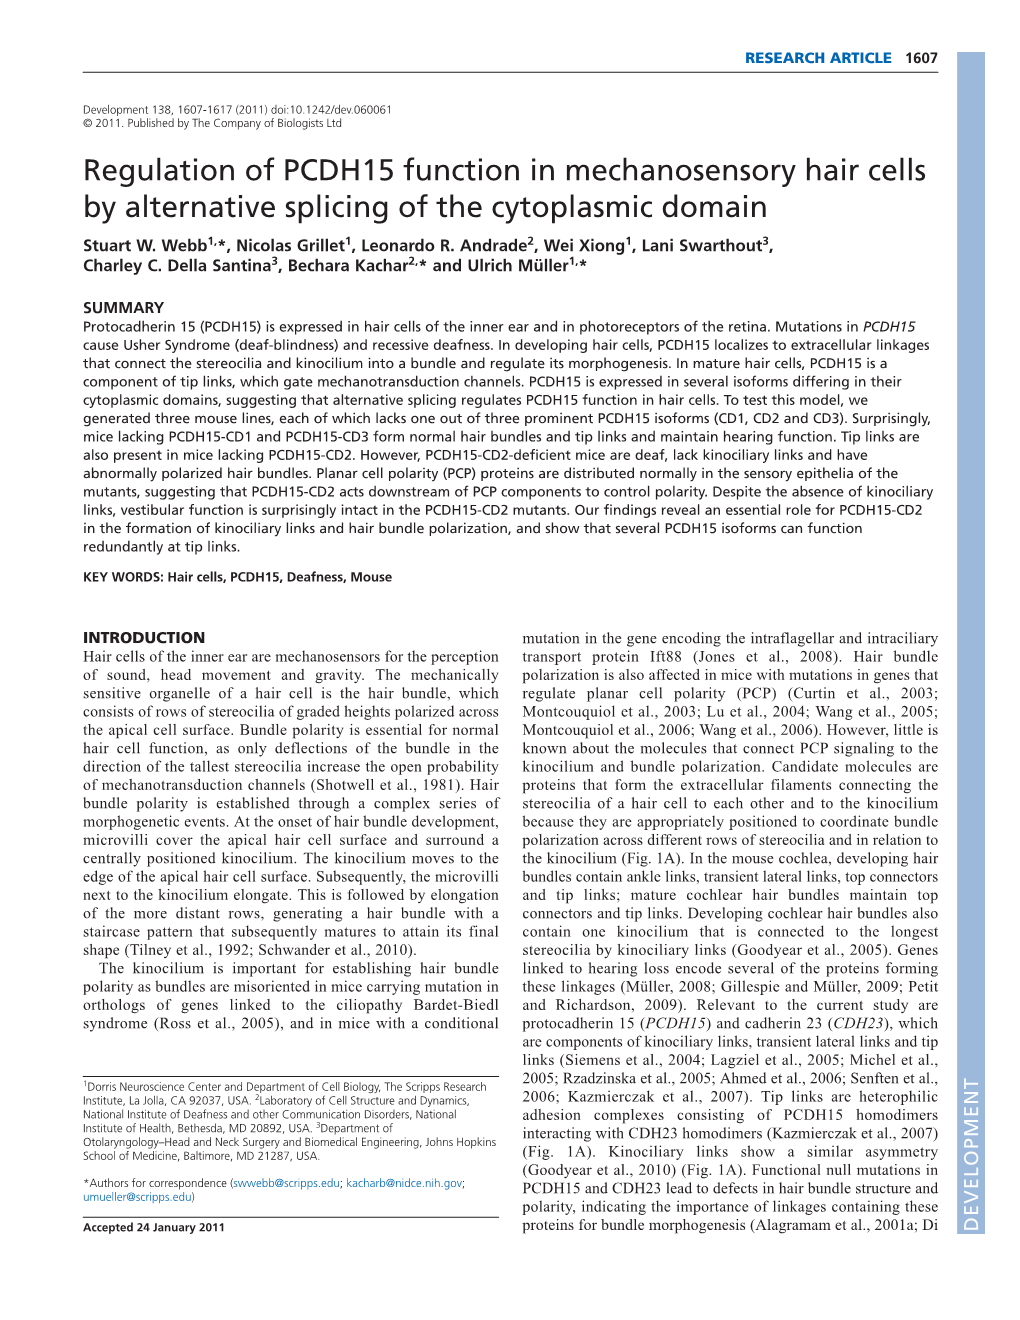 Regulation of PCDH15 Function in Mechanosensory Hair Cells by Alternative Splicing of the Cytoplasmic Domain Stuart W